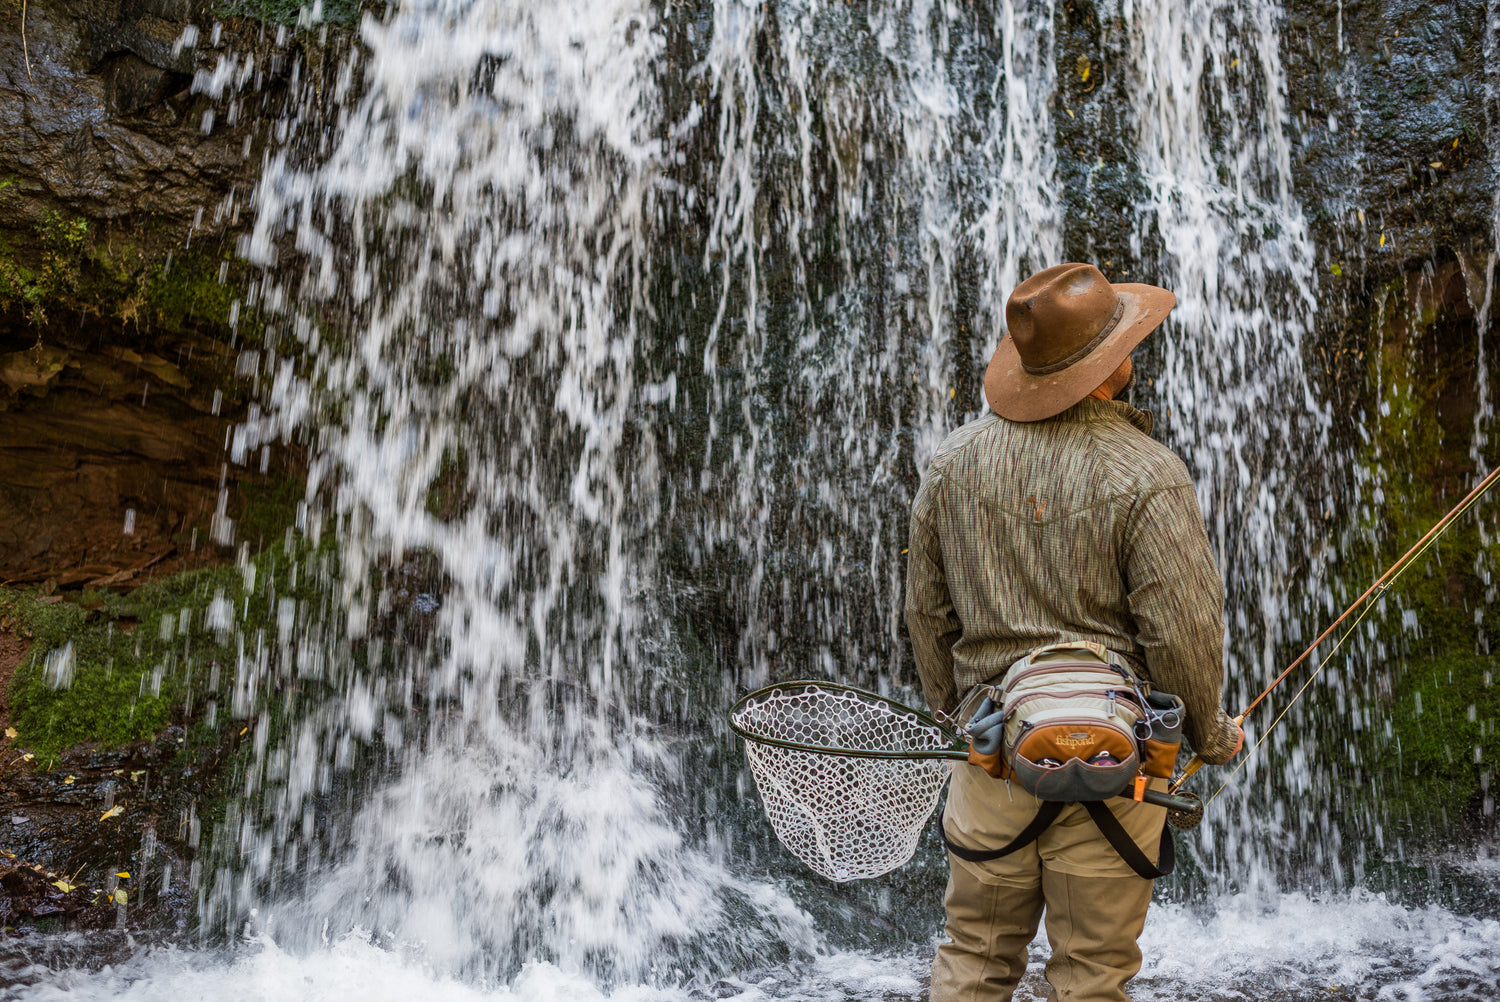 THE ULTIMATE FLY FISHING GIFT GUIDE